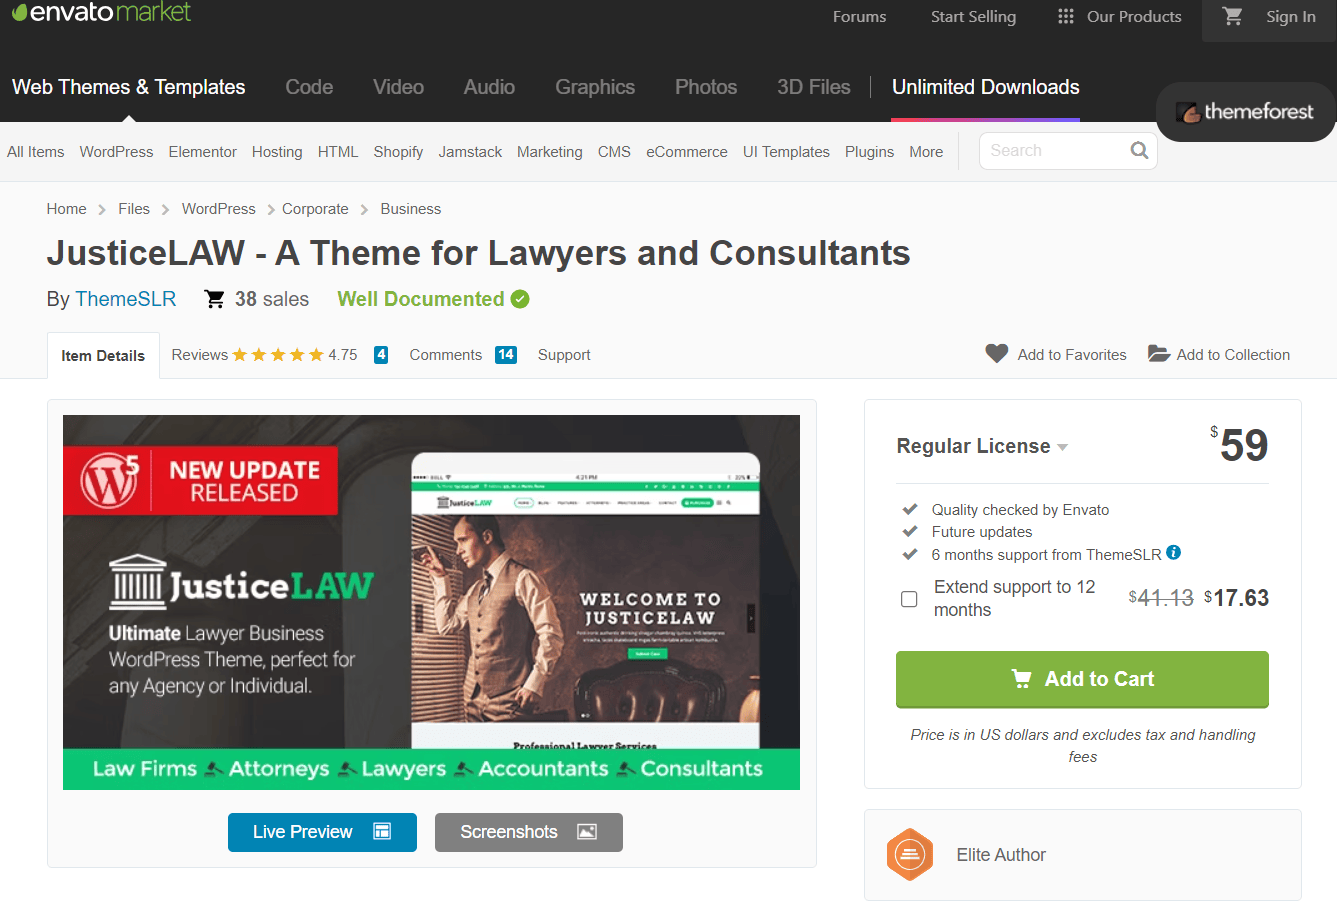 "A Theme for Lawyers and Consultants" product listing on Envato Market